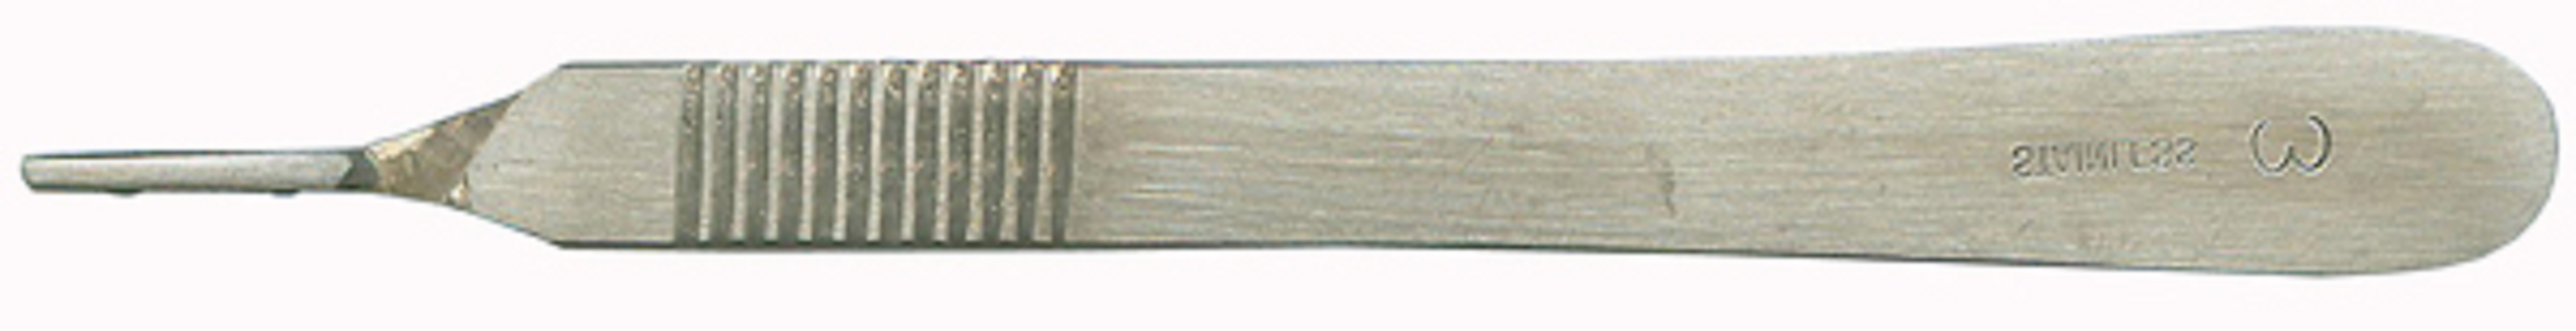 STAINLESS Scalpel Handle No 3 for blades 10 : 10a : 11 : 12 : 15 : 15a